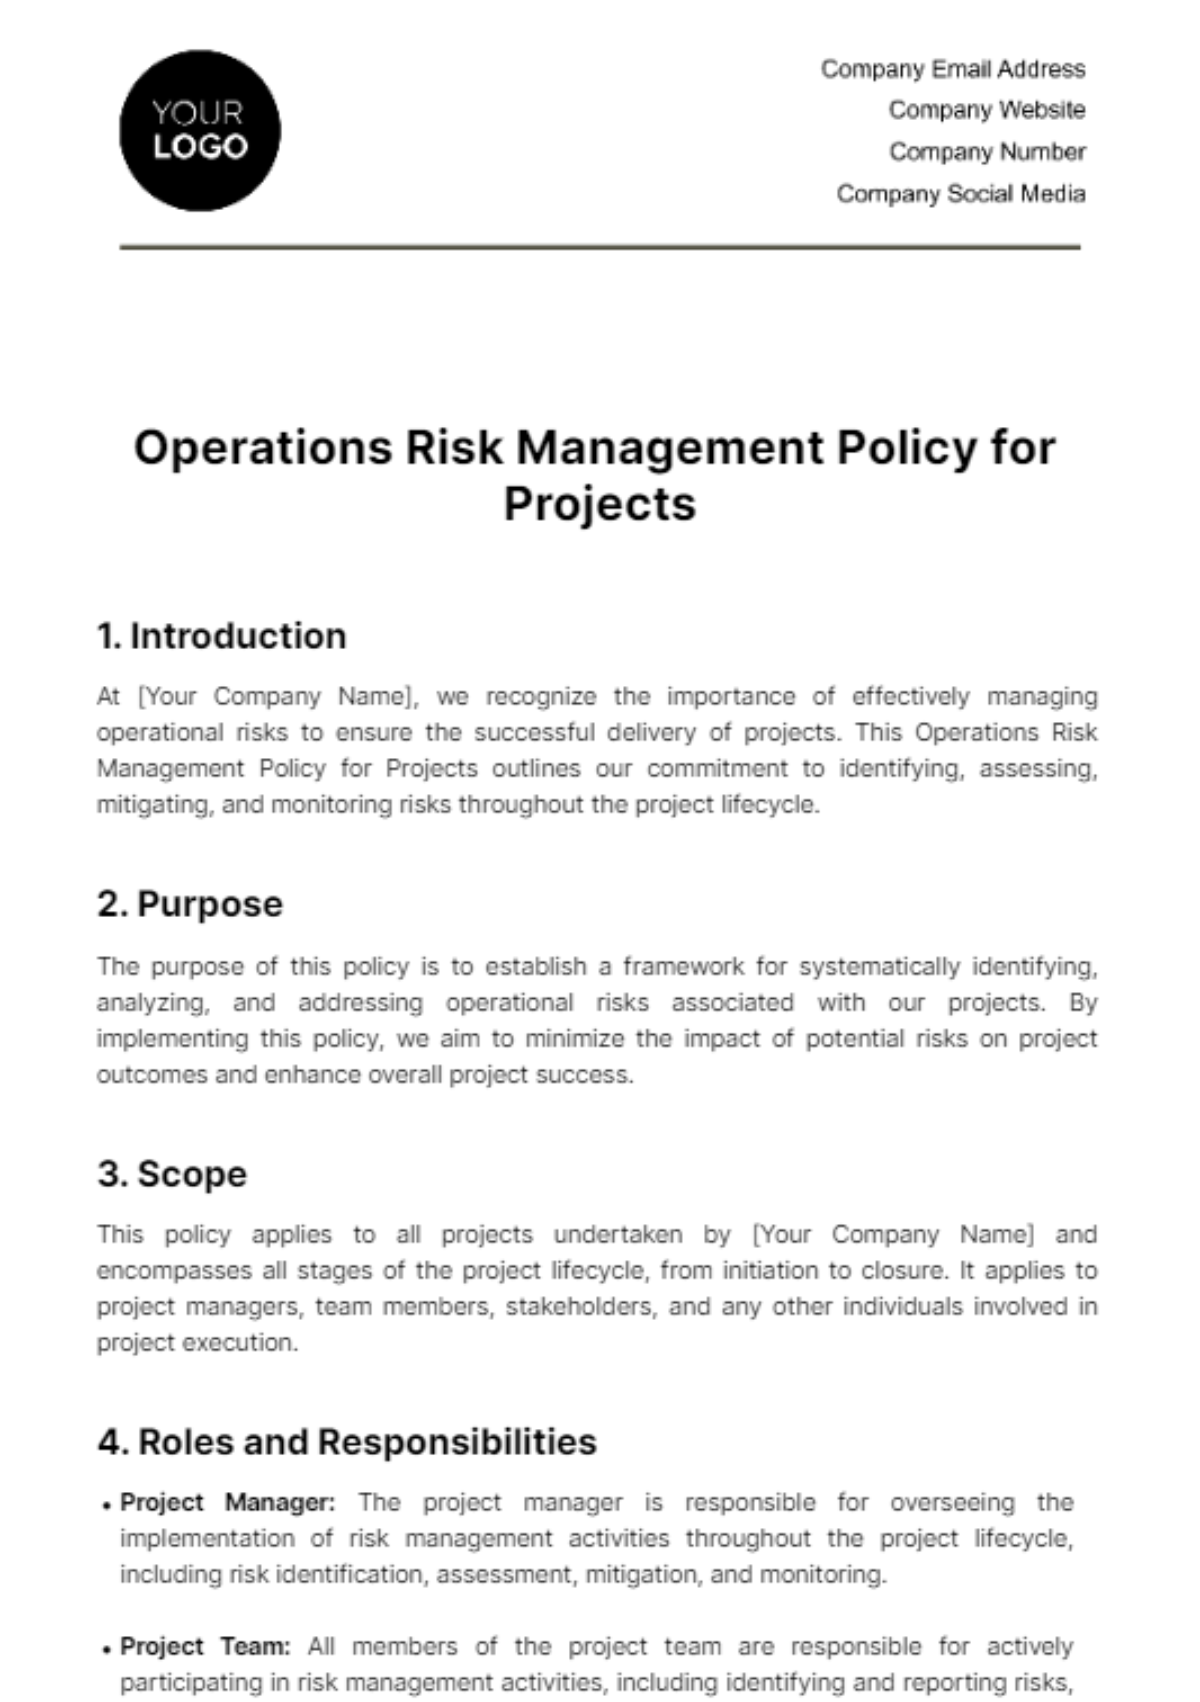 Operations Risk Management Policy for Projects Template